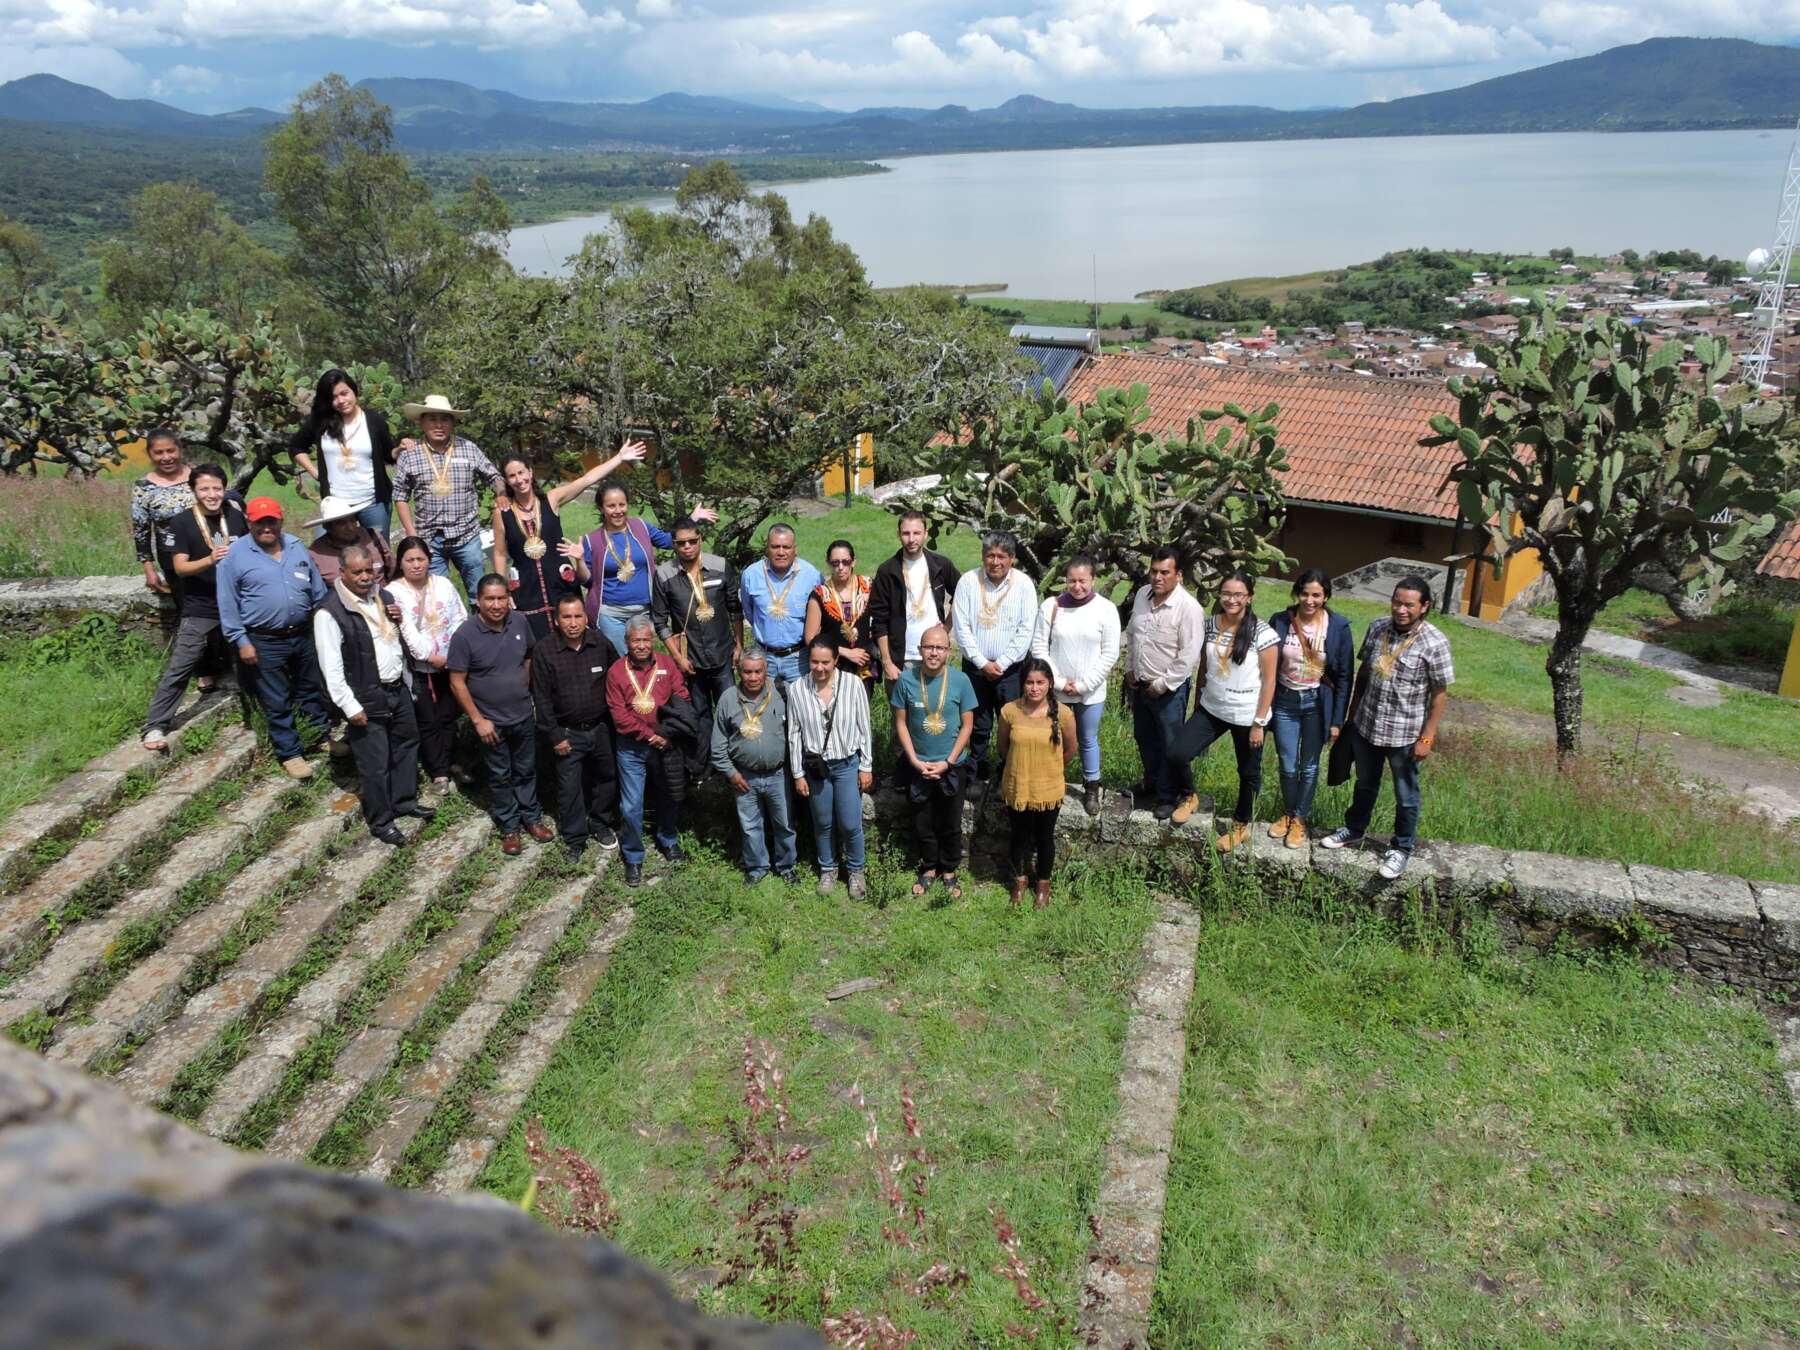 Participants in the first Intercultural Dialogue on Institutions, Rights and Biocultural Heritage held in 2019 in San Jerónimo Purenchécuaro, Michoacán, Mexico.